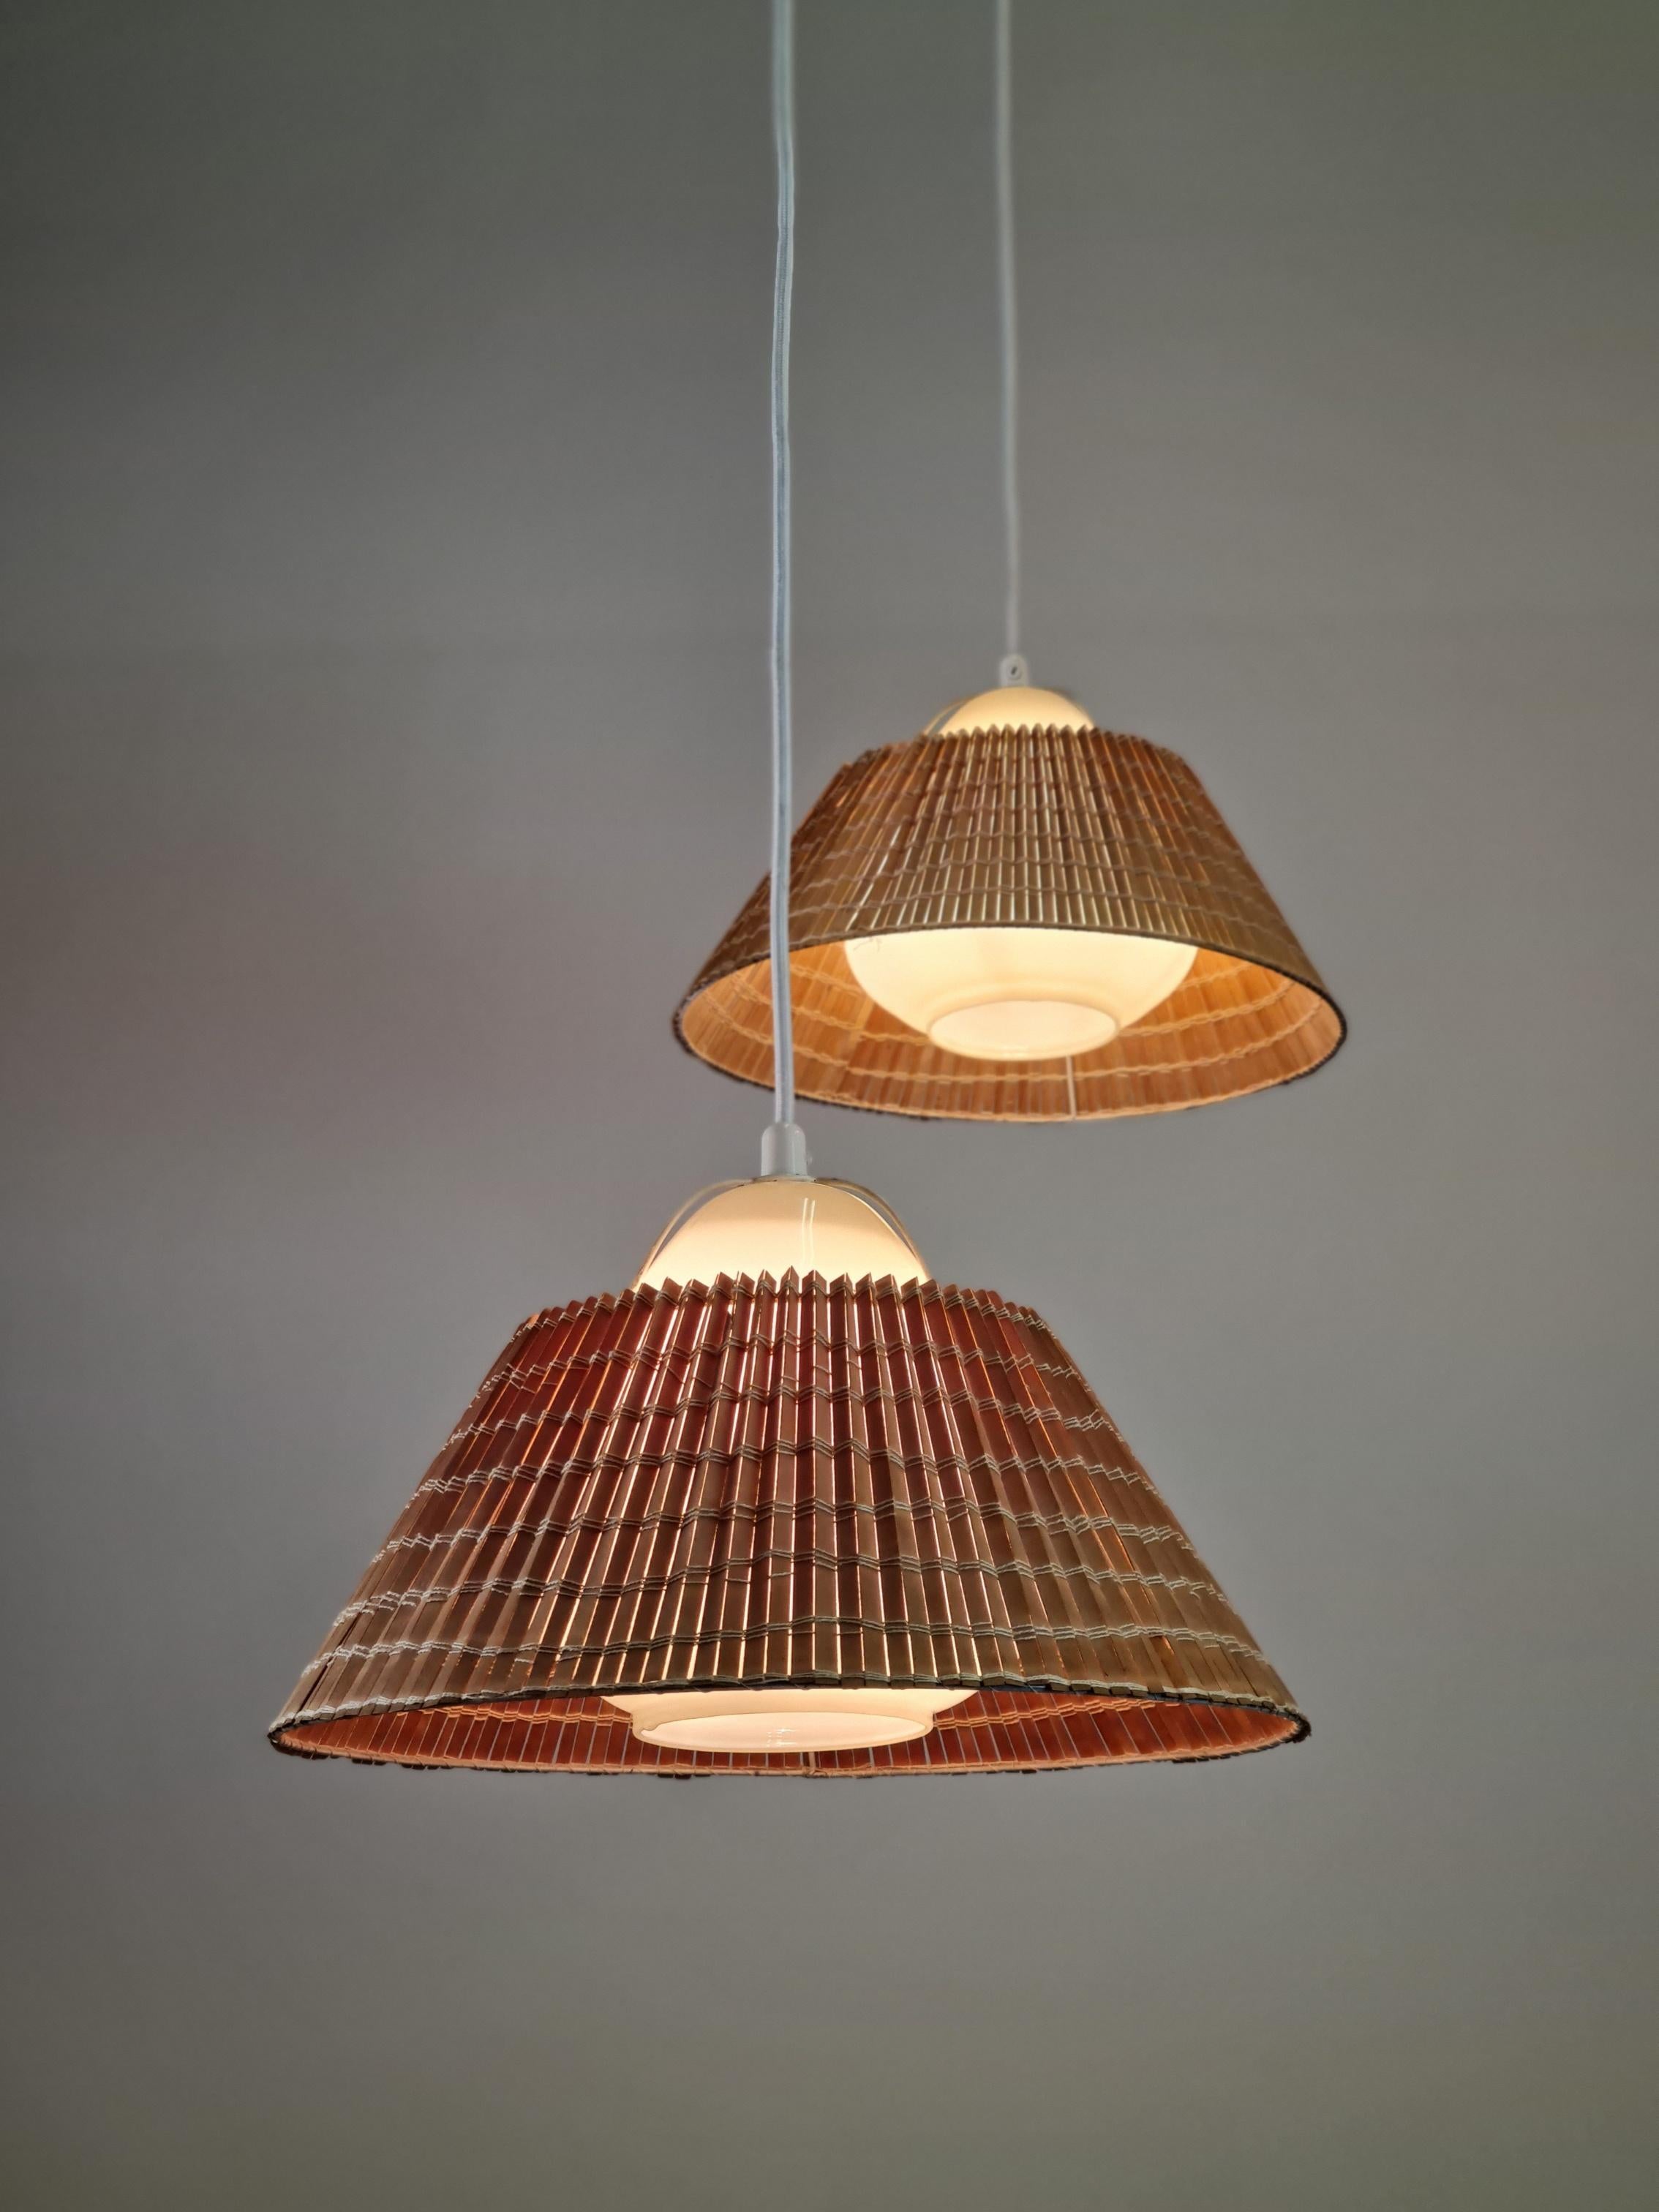 A lovely pair of Lisa Johansson-Papé ceiling lamps from the 1940s. A beautiful organic design of pear shaped mouth blown opal glass with the original rattan shade. As the lamps hand freely and supported by the electric wire, these pendants are